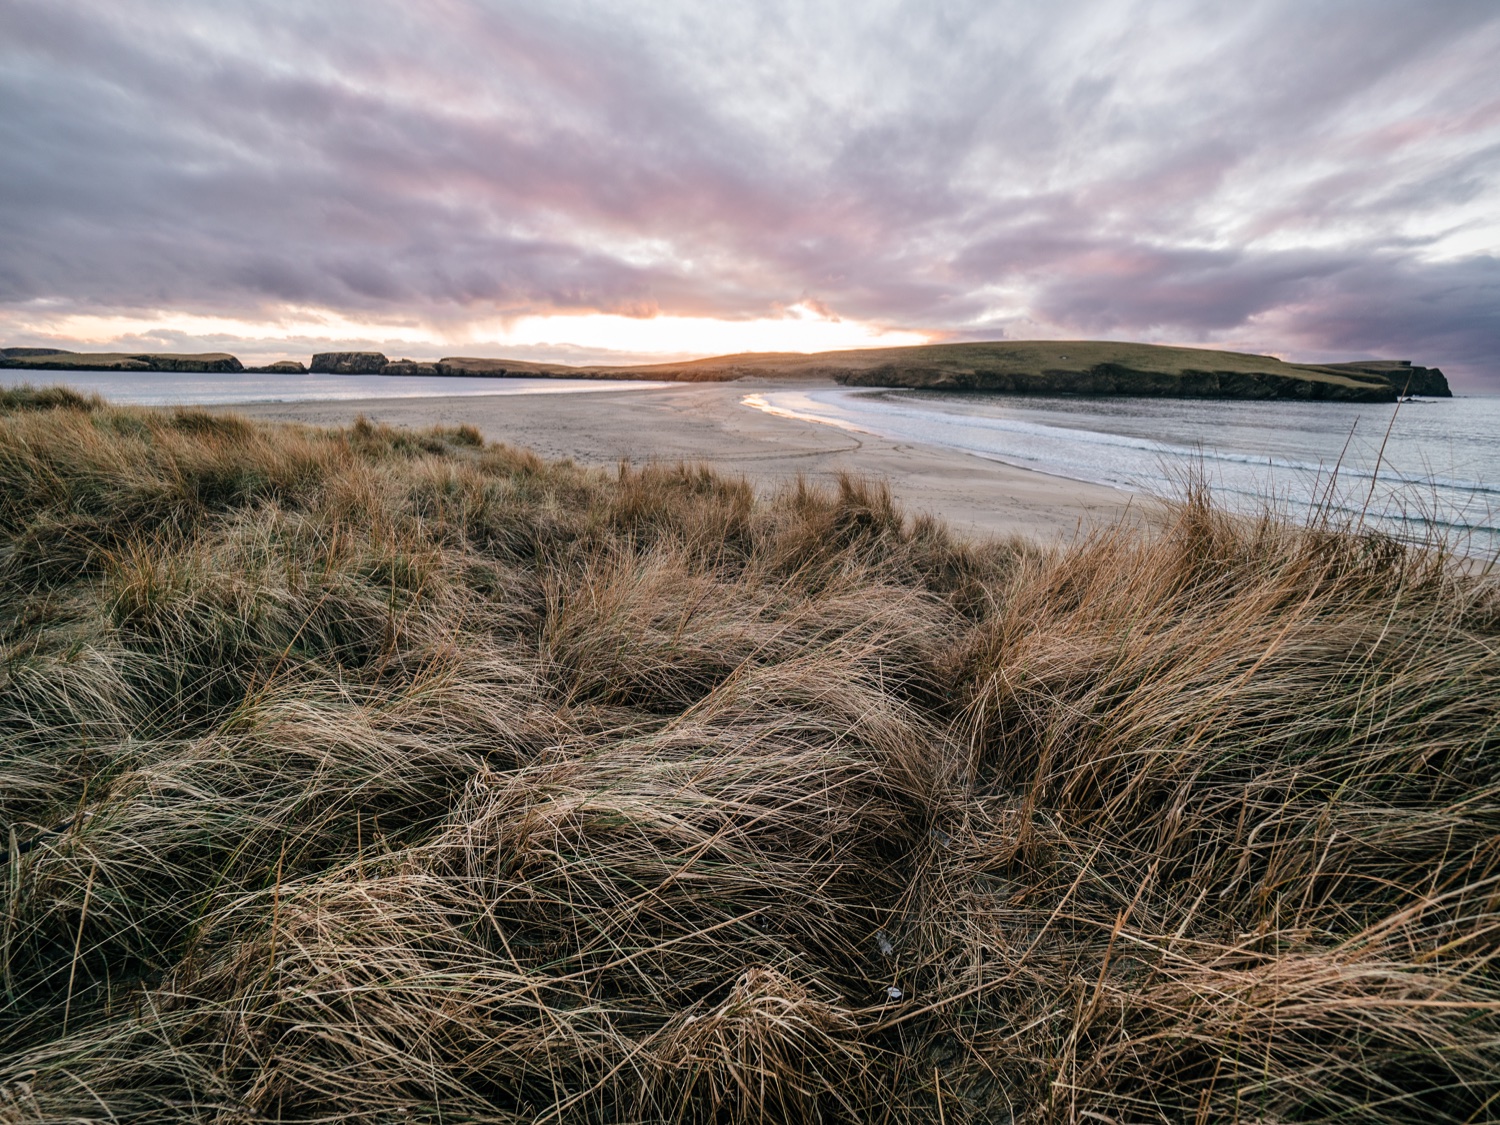 An image of long grasses and ocean, taken at St Ninian's Isle in Shetland